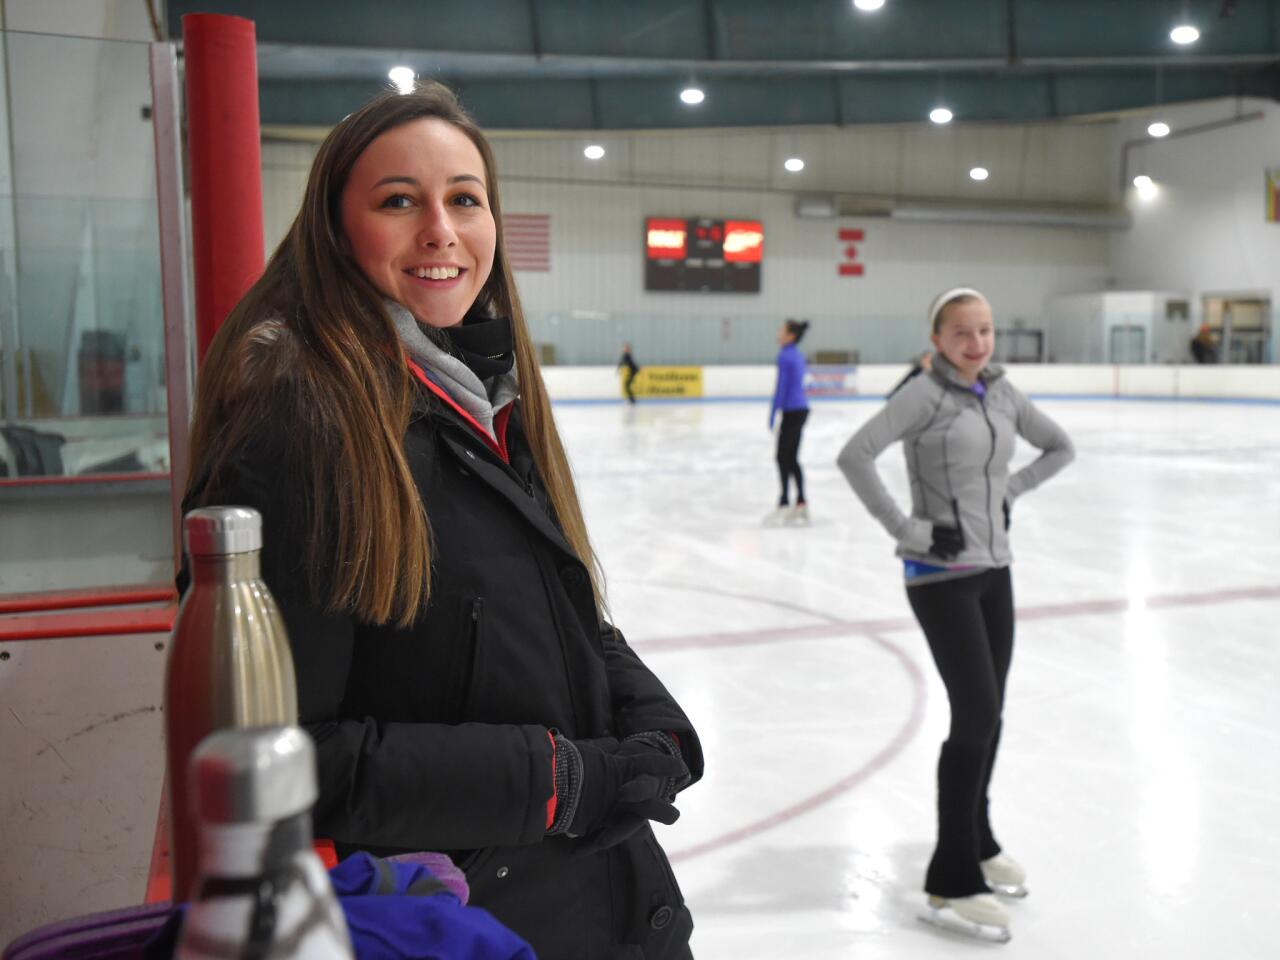 Kimmie Meissner, who finished sixth in women's figure skating at the Olympics in February 2006 and won the world championships the following month, is now a skating coach. Here, she works with Mia Eckels, 15 of Shrewsbury,Pa., on Jan. 10, 2018, at Ice World in Abingdon.